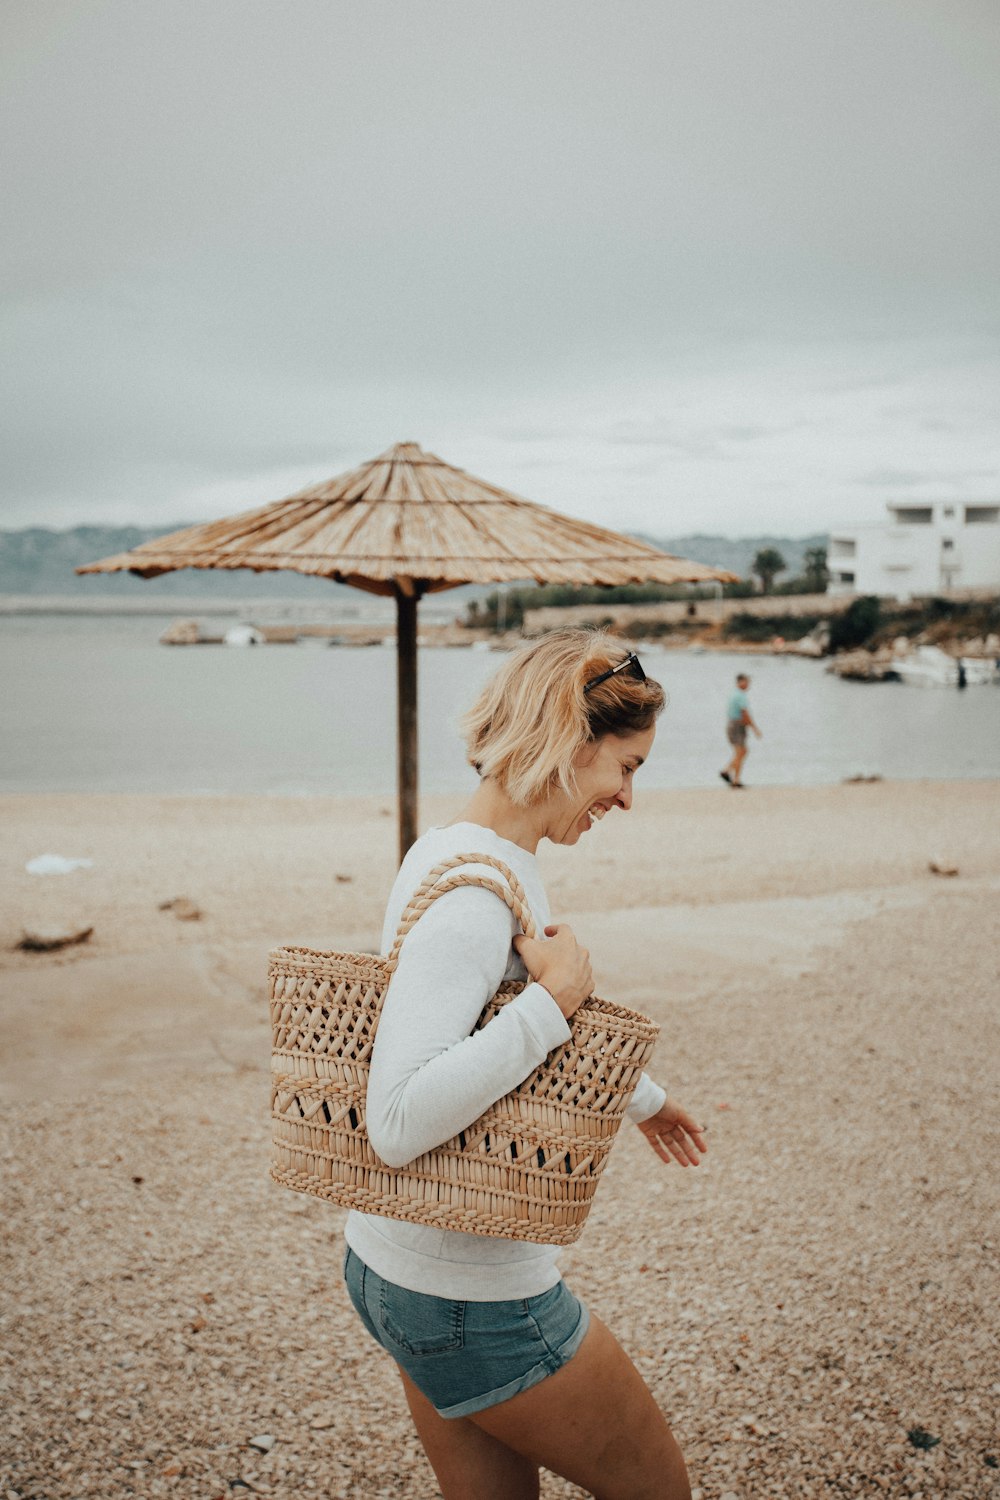 woman in white long sleeve shirt sitting on brown wicker chair on beach during daytime